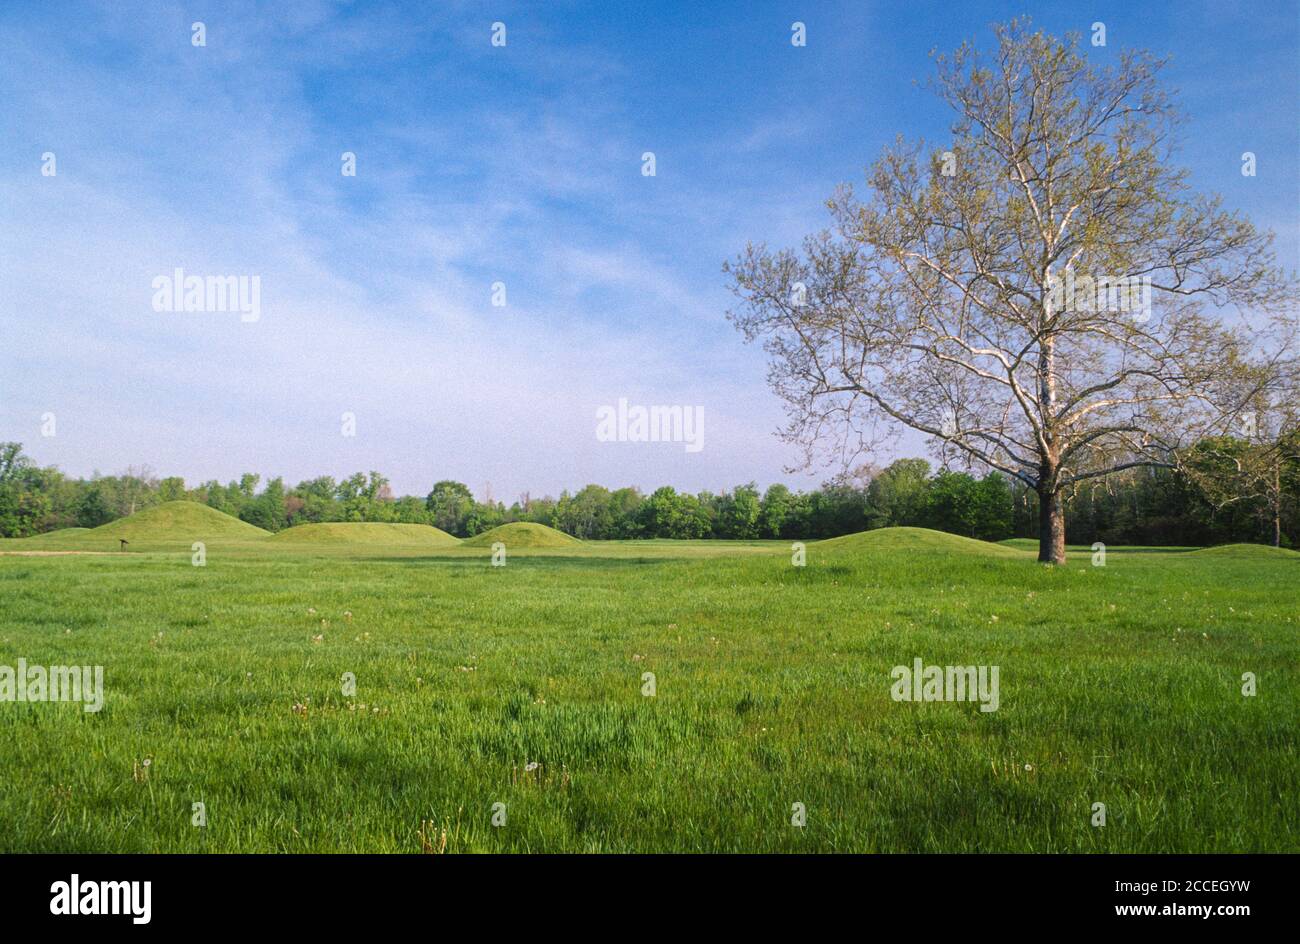 Burial Mounds, Hopewell Culture National Historical Park, Chillicothe, Ohio, USA Foto Stock